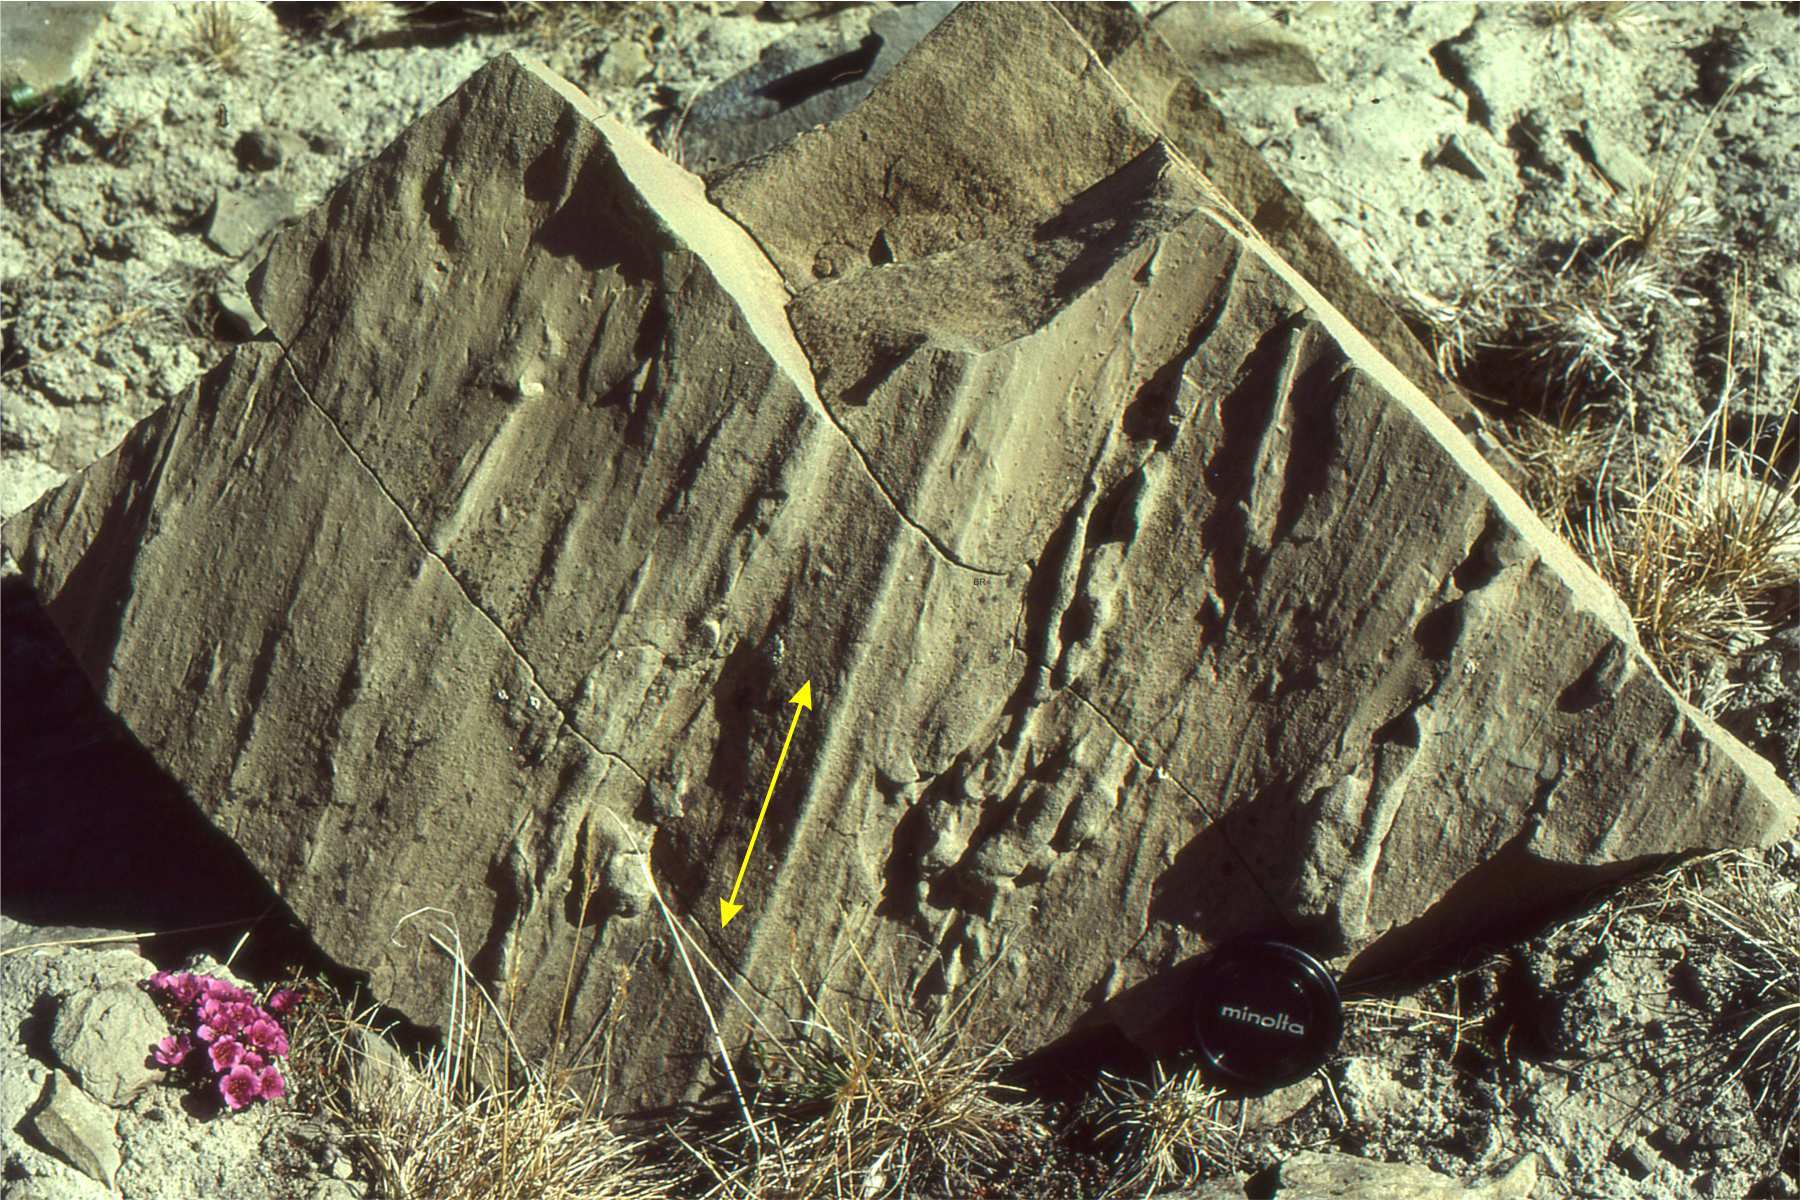 This image shows groove casts, which are elongated impressions in the rock. These are oriented up-down.